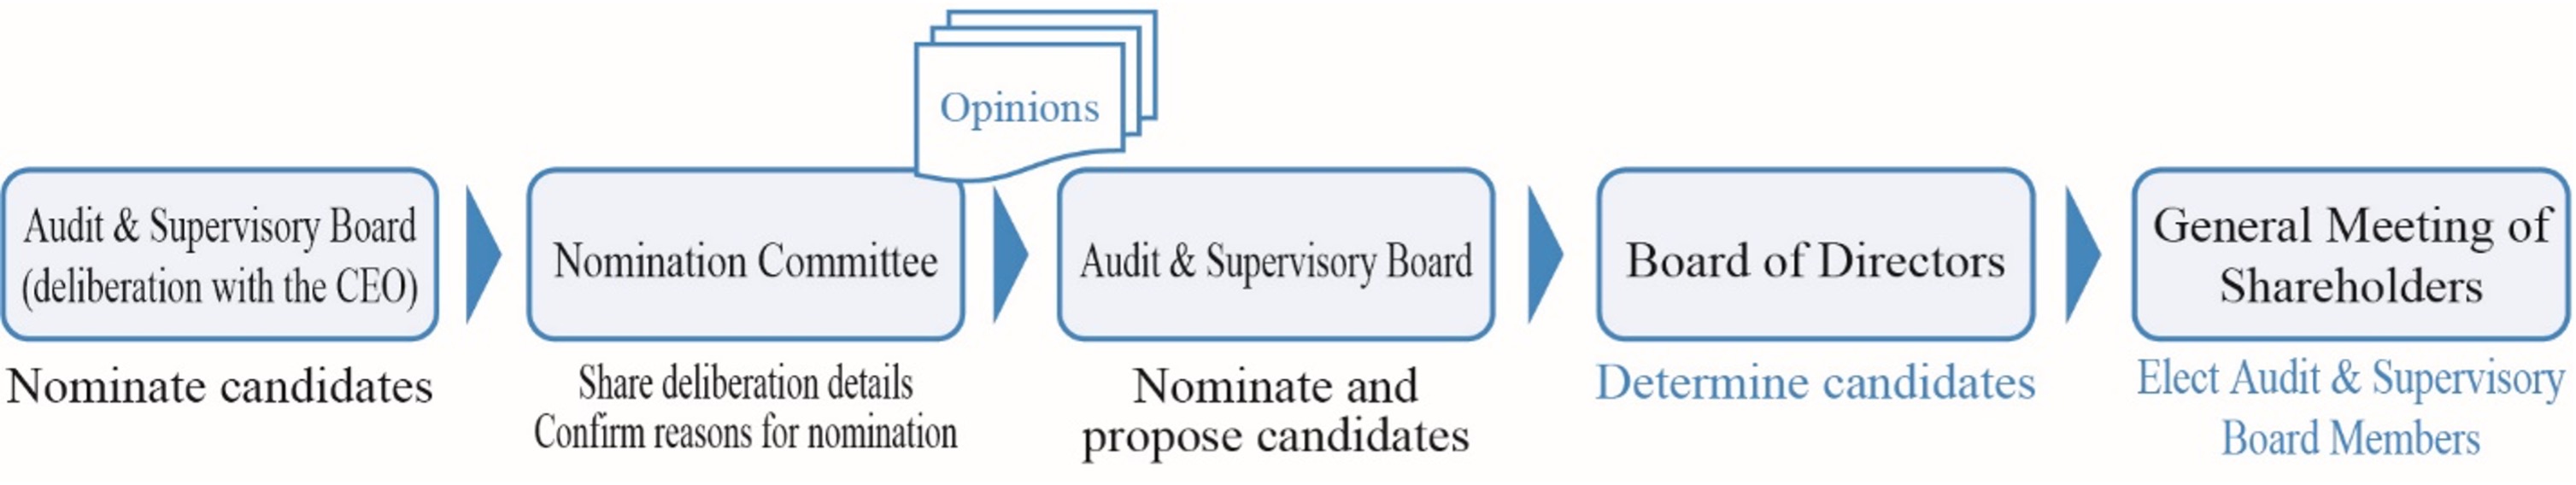 Election Process for Audit & Supervisory Board Members